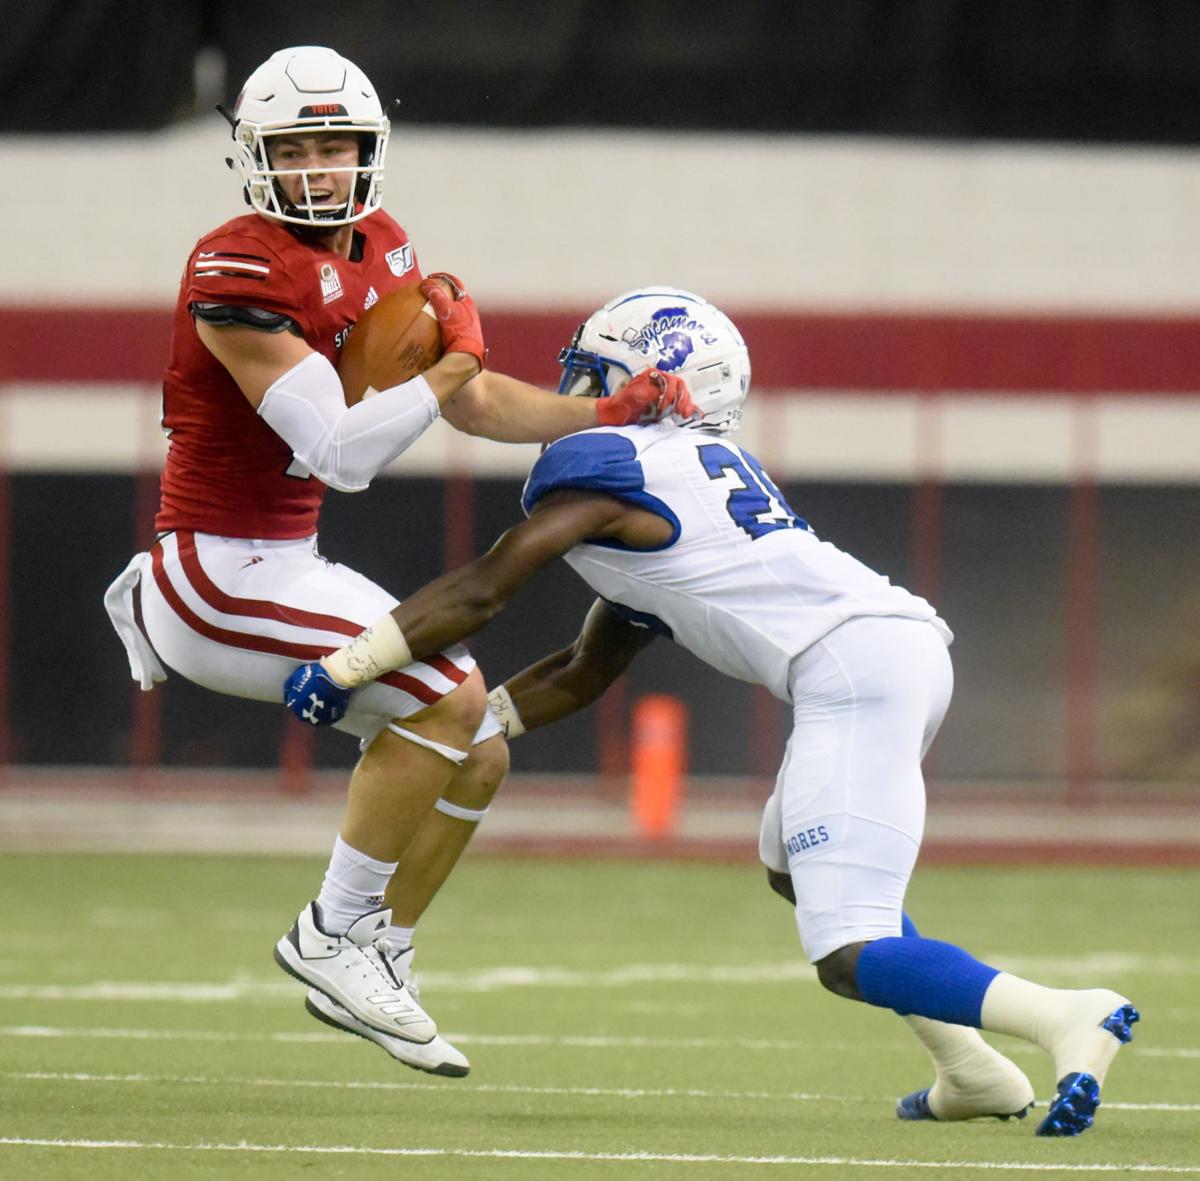 South Dakota football shuts out Indiana State | College sports ...